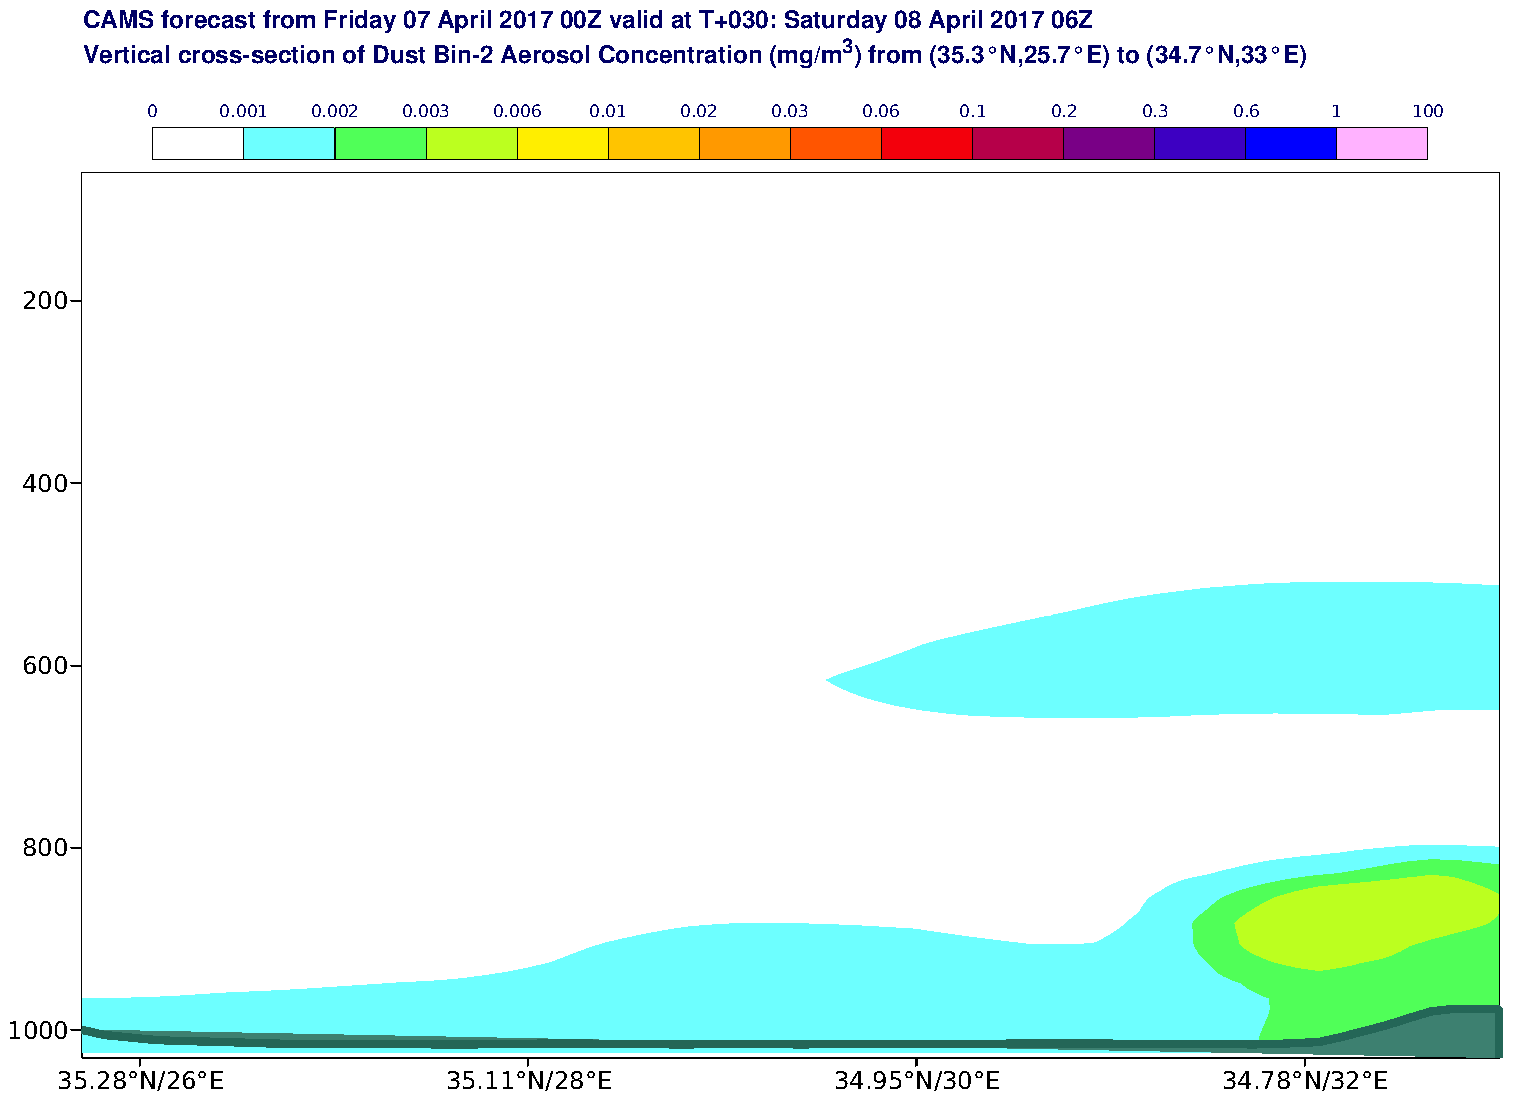 Vertical cross-section of Dust Bin-2 Aerosol Concentration (mg/m3) valid at T30 - 2017-04-08 06:00